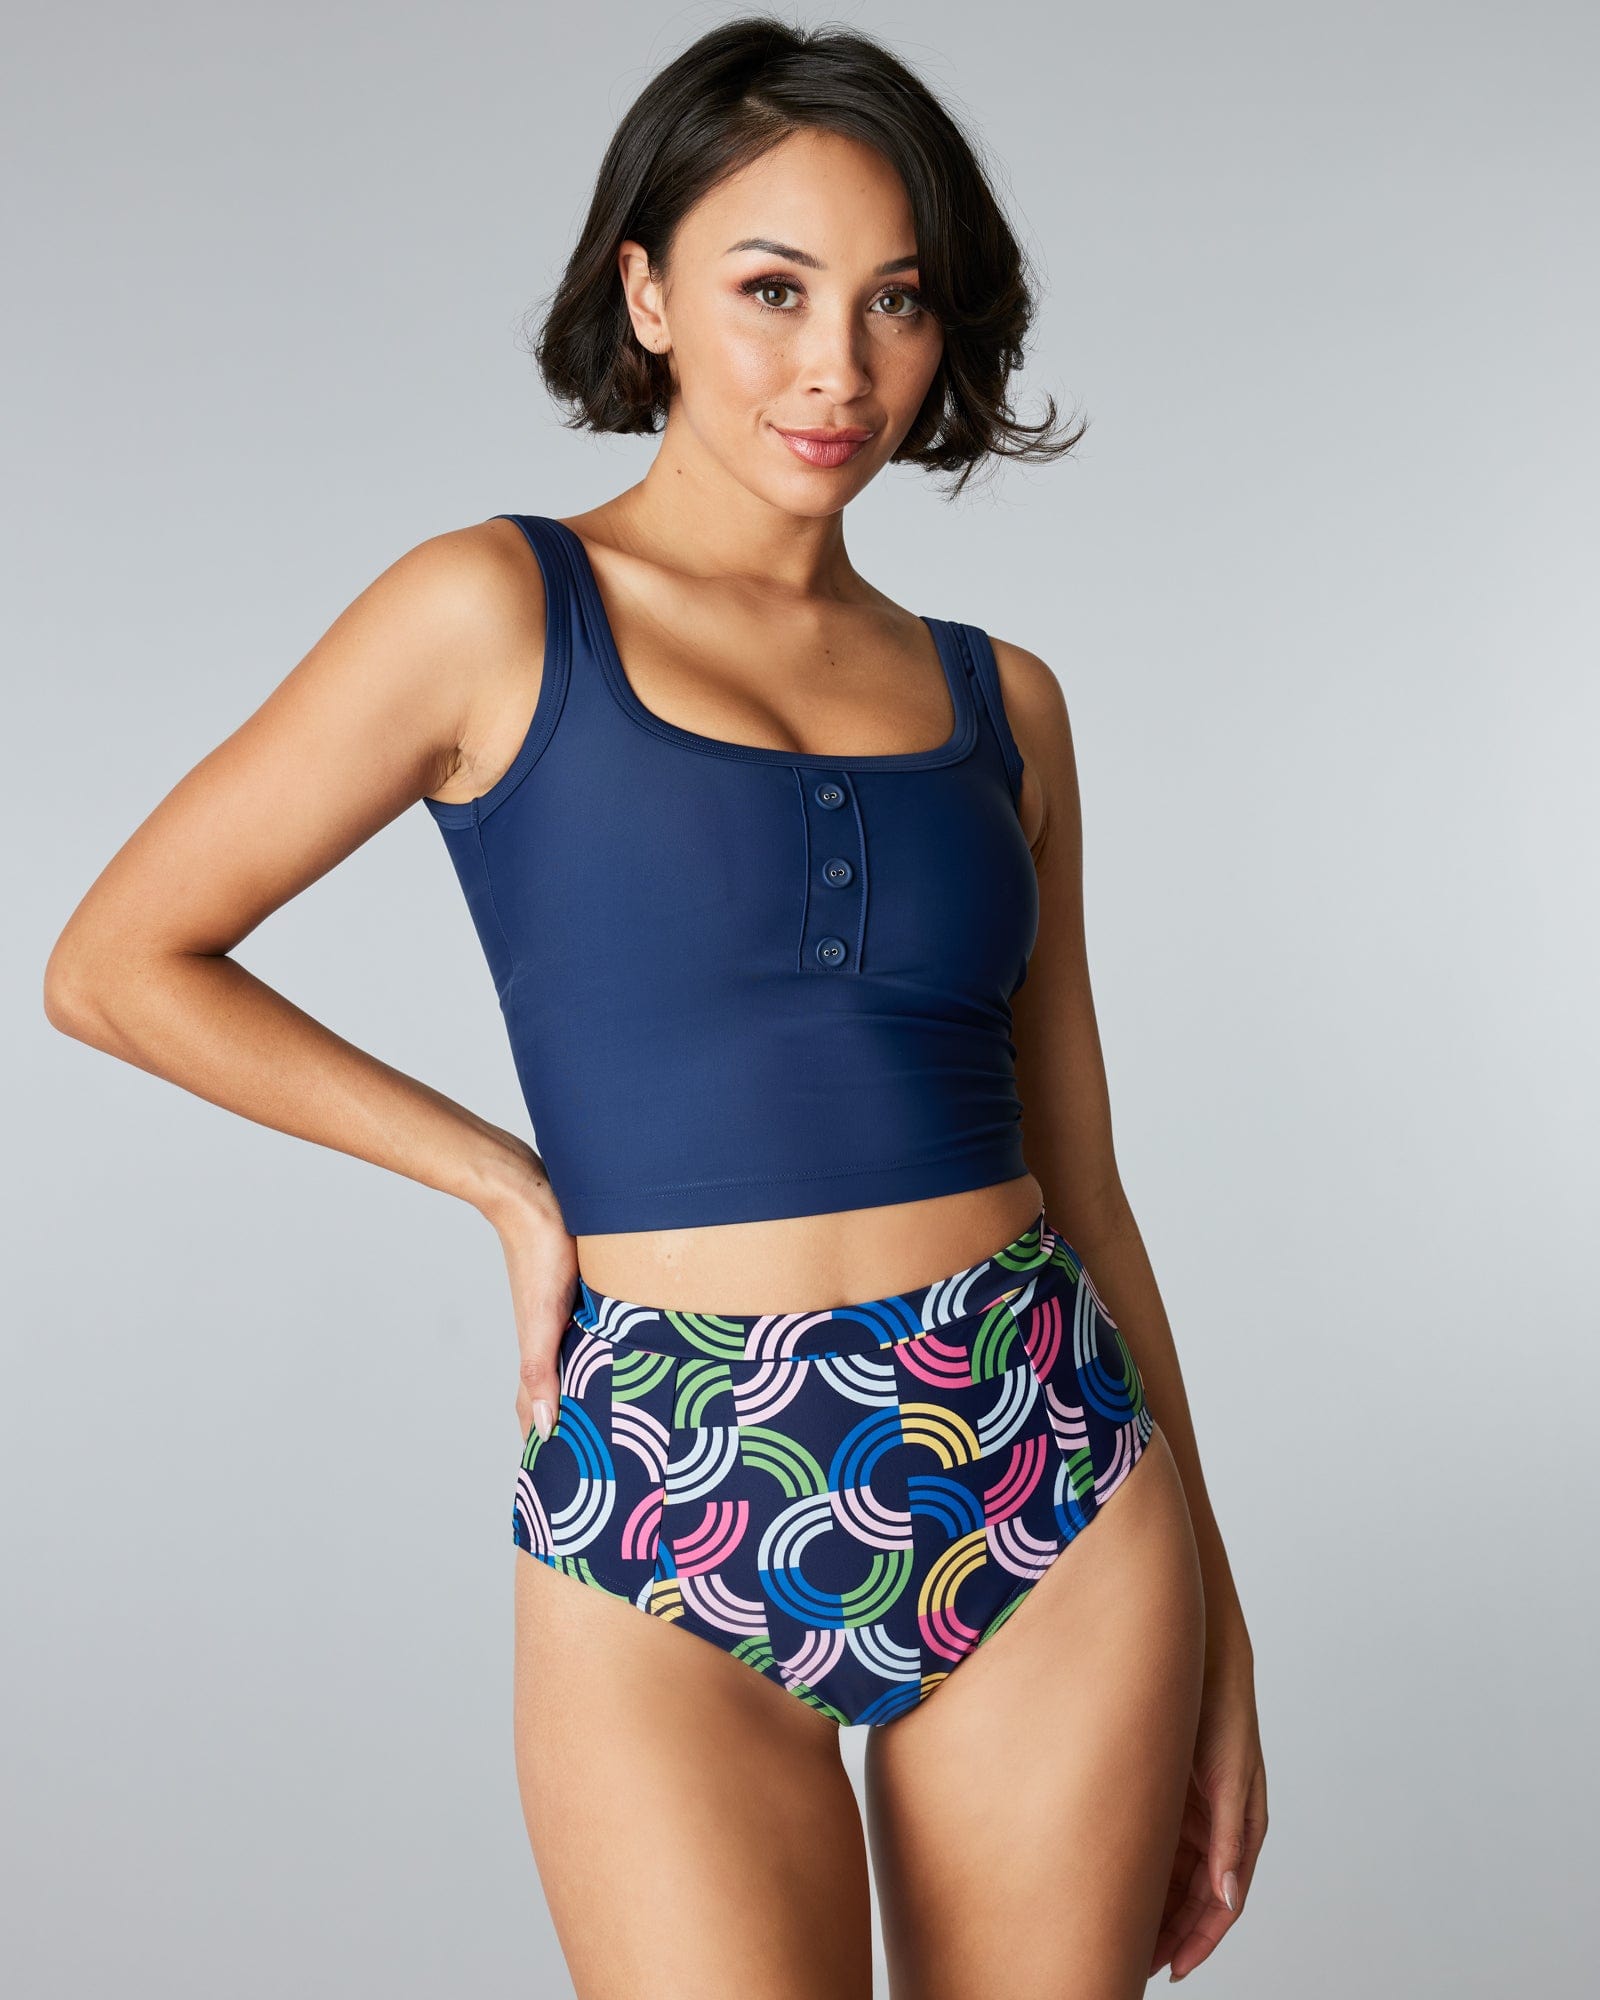 Woman in a two-piece swimsuit with a solid blue top and a rainbow print and patterned bottom.